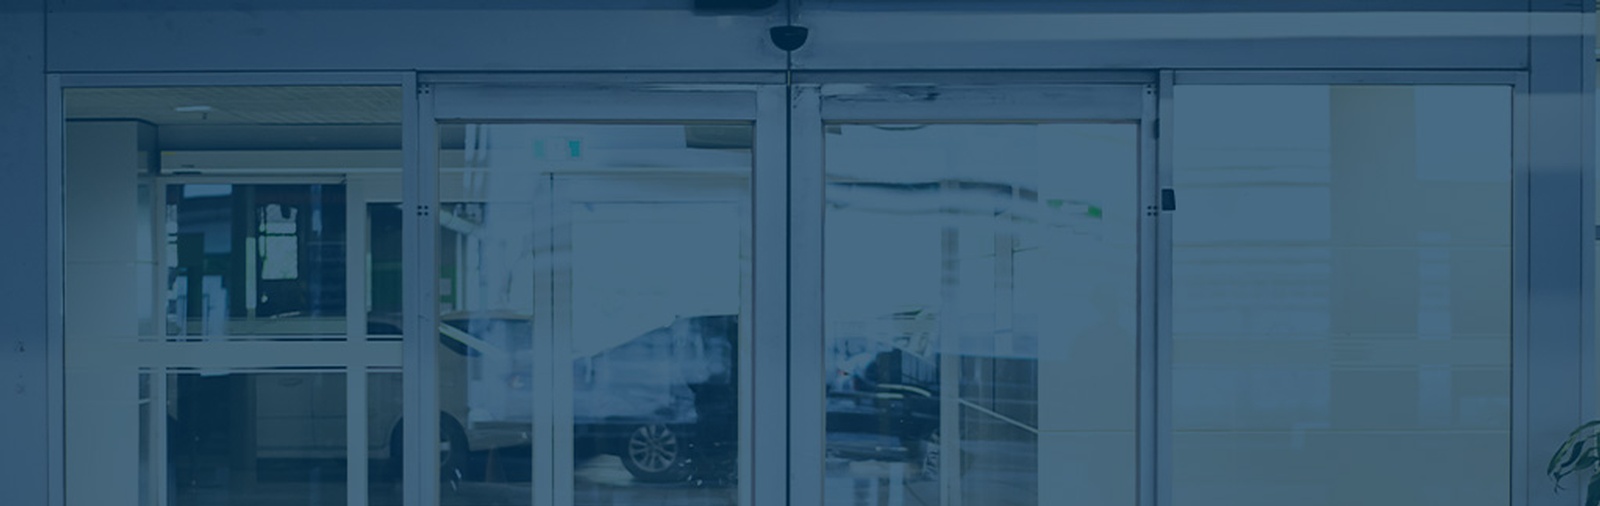 Access Control, Automatic Doors & Security Camera Installation in Barrie, ON